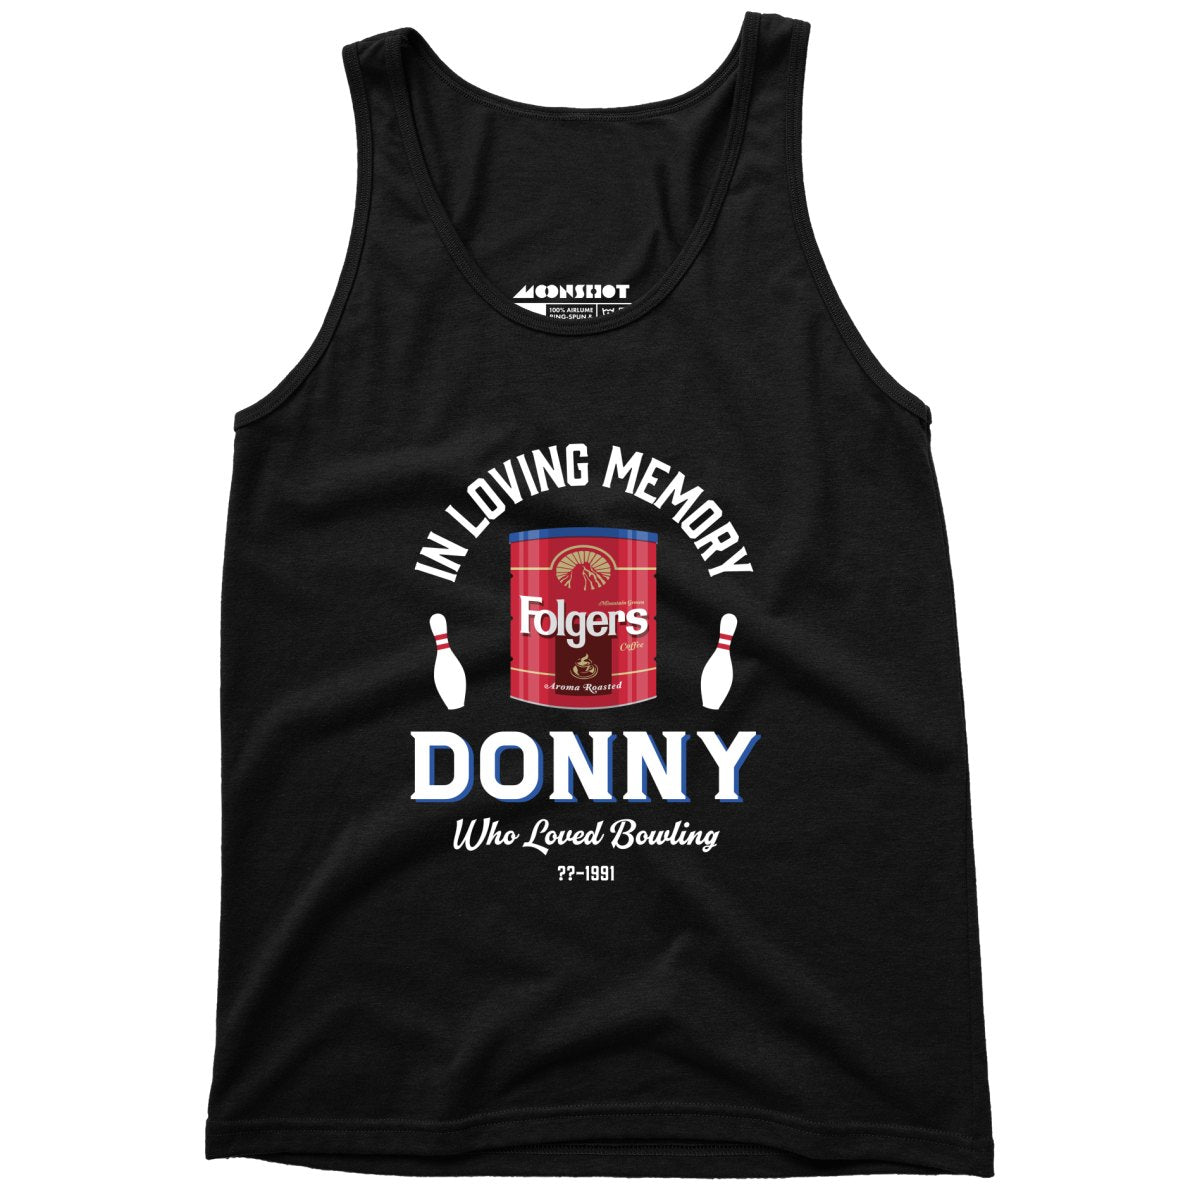 Donny Who Loved Bowling - Unisex Tank Top